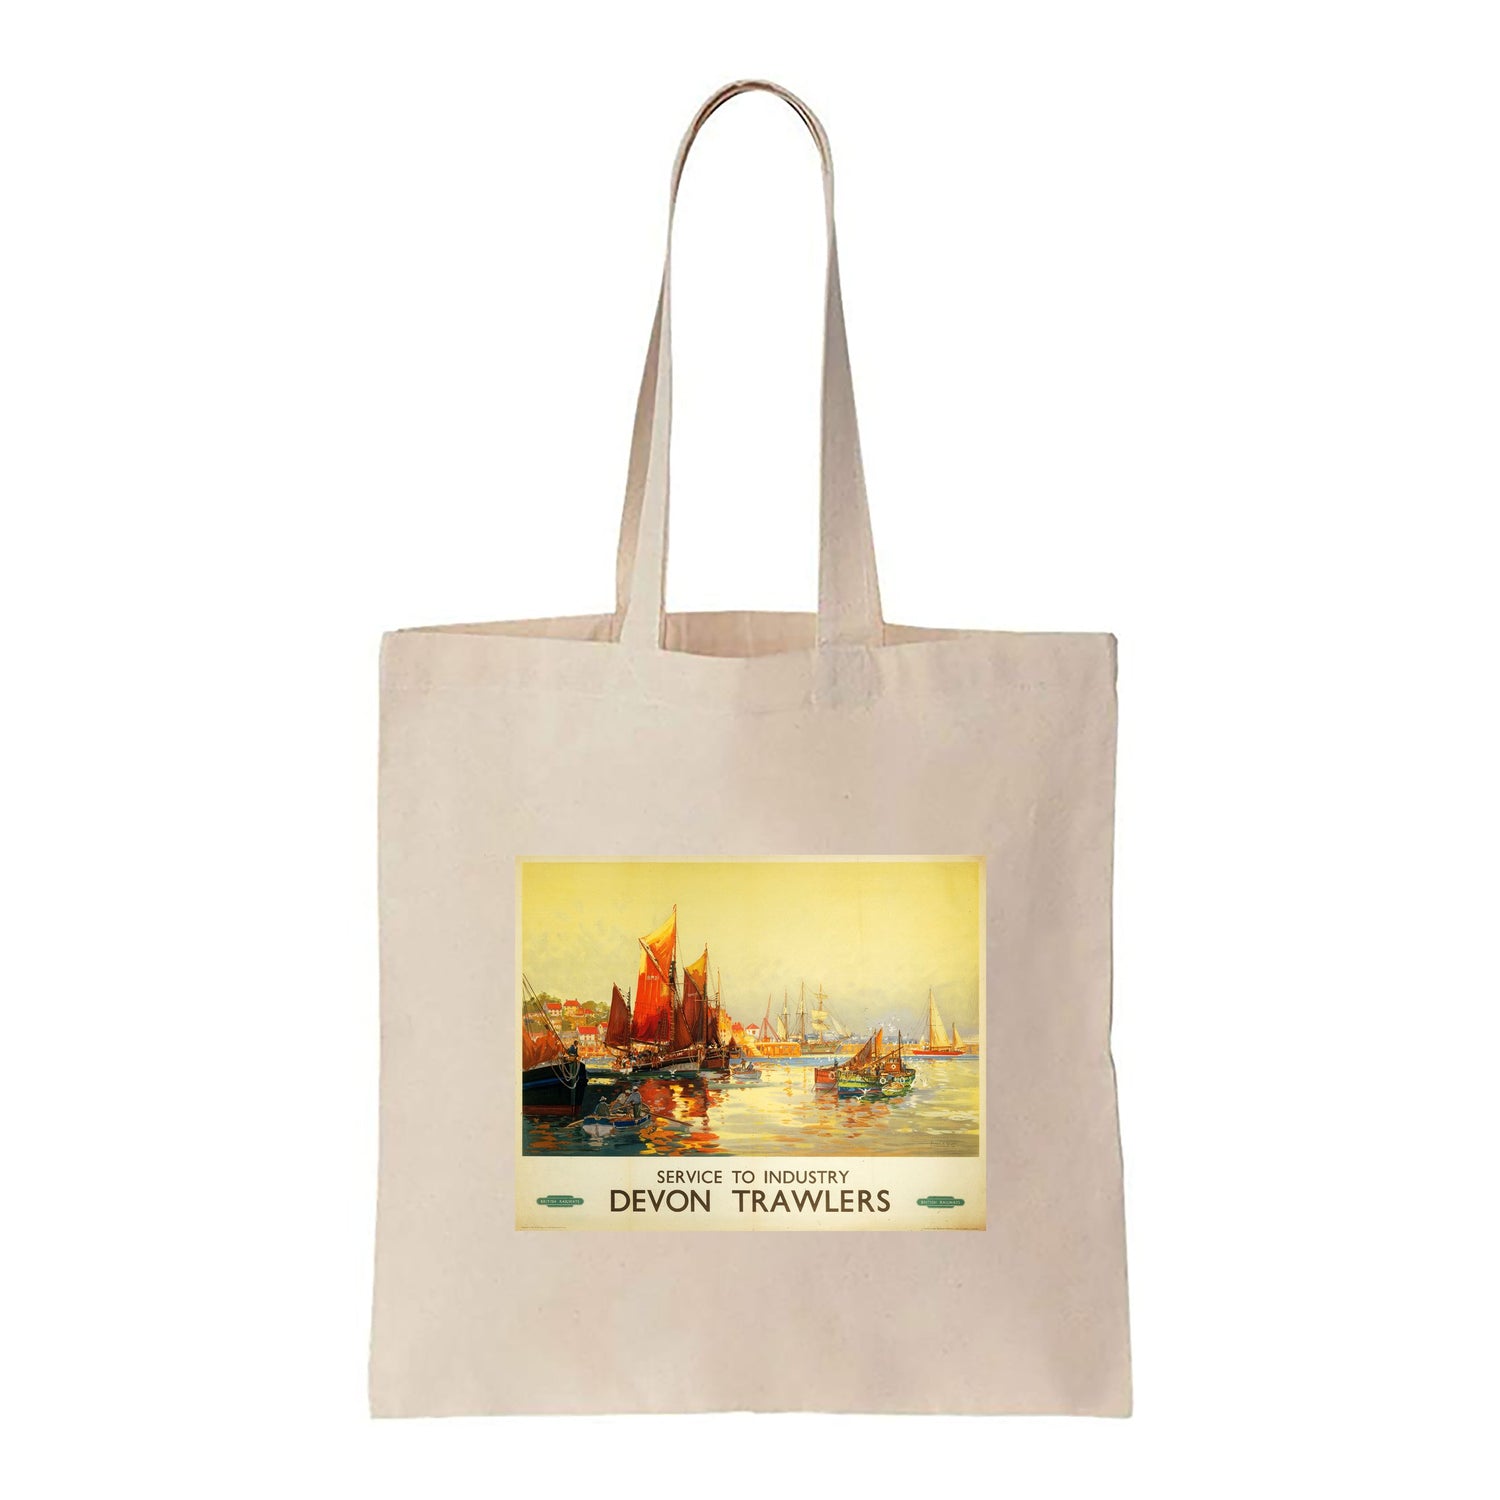 Devon Trawlers - Service to Industry - Canvas Tote Bag